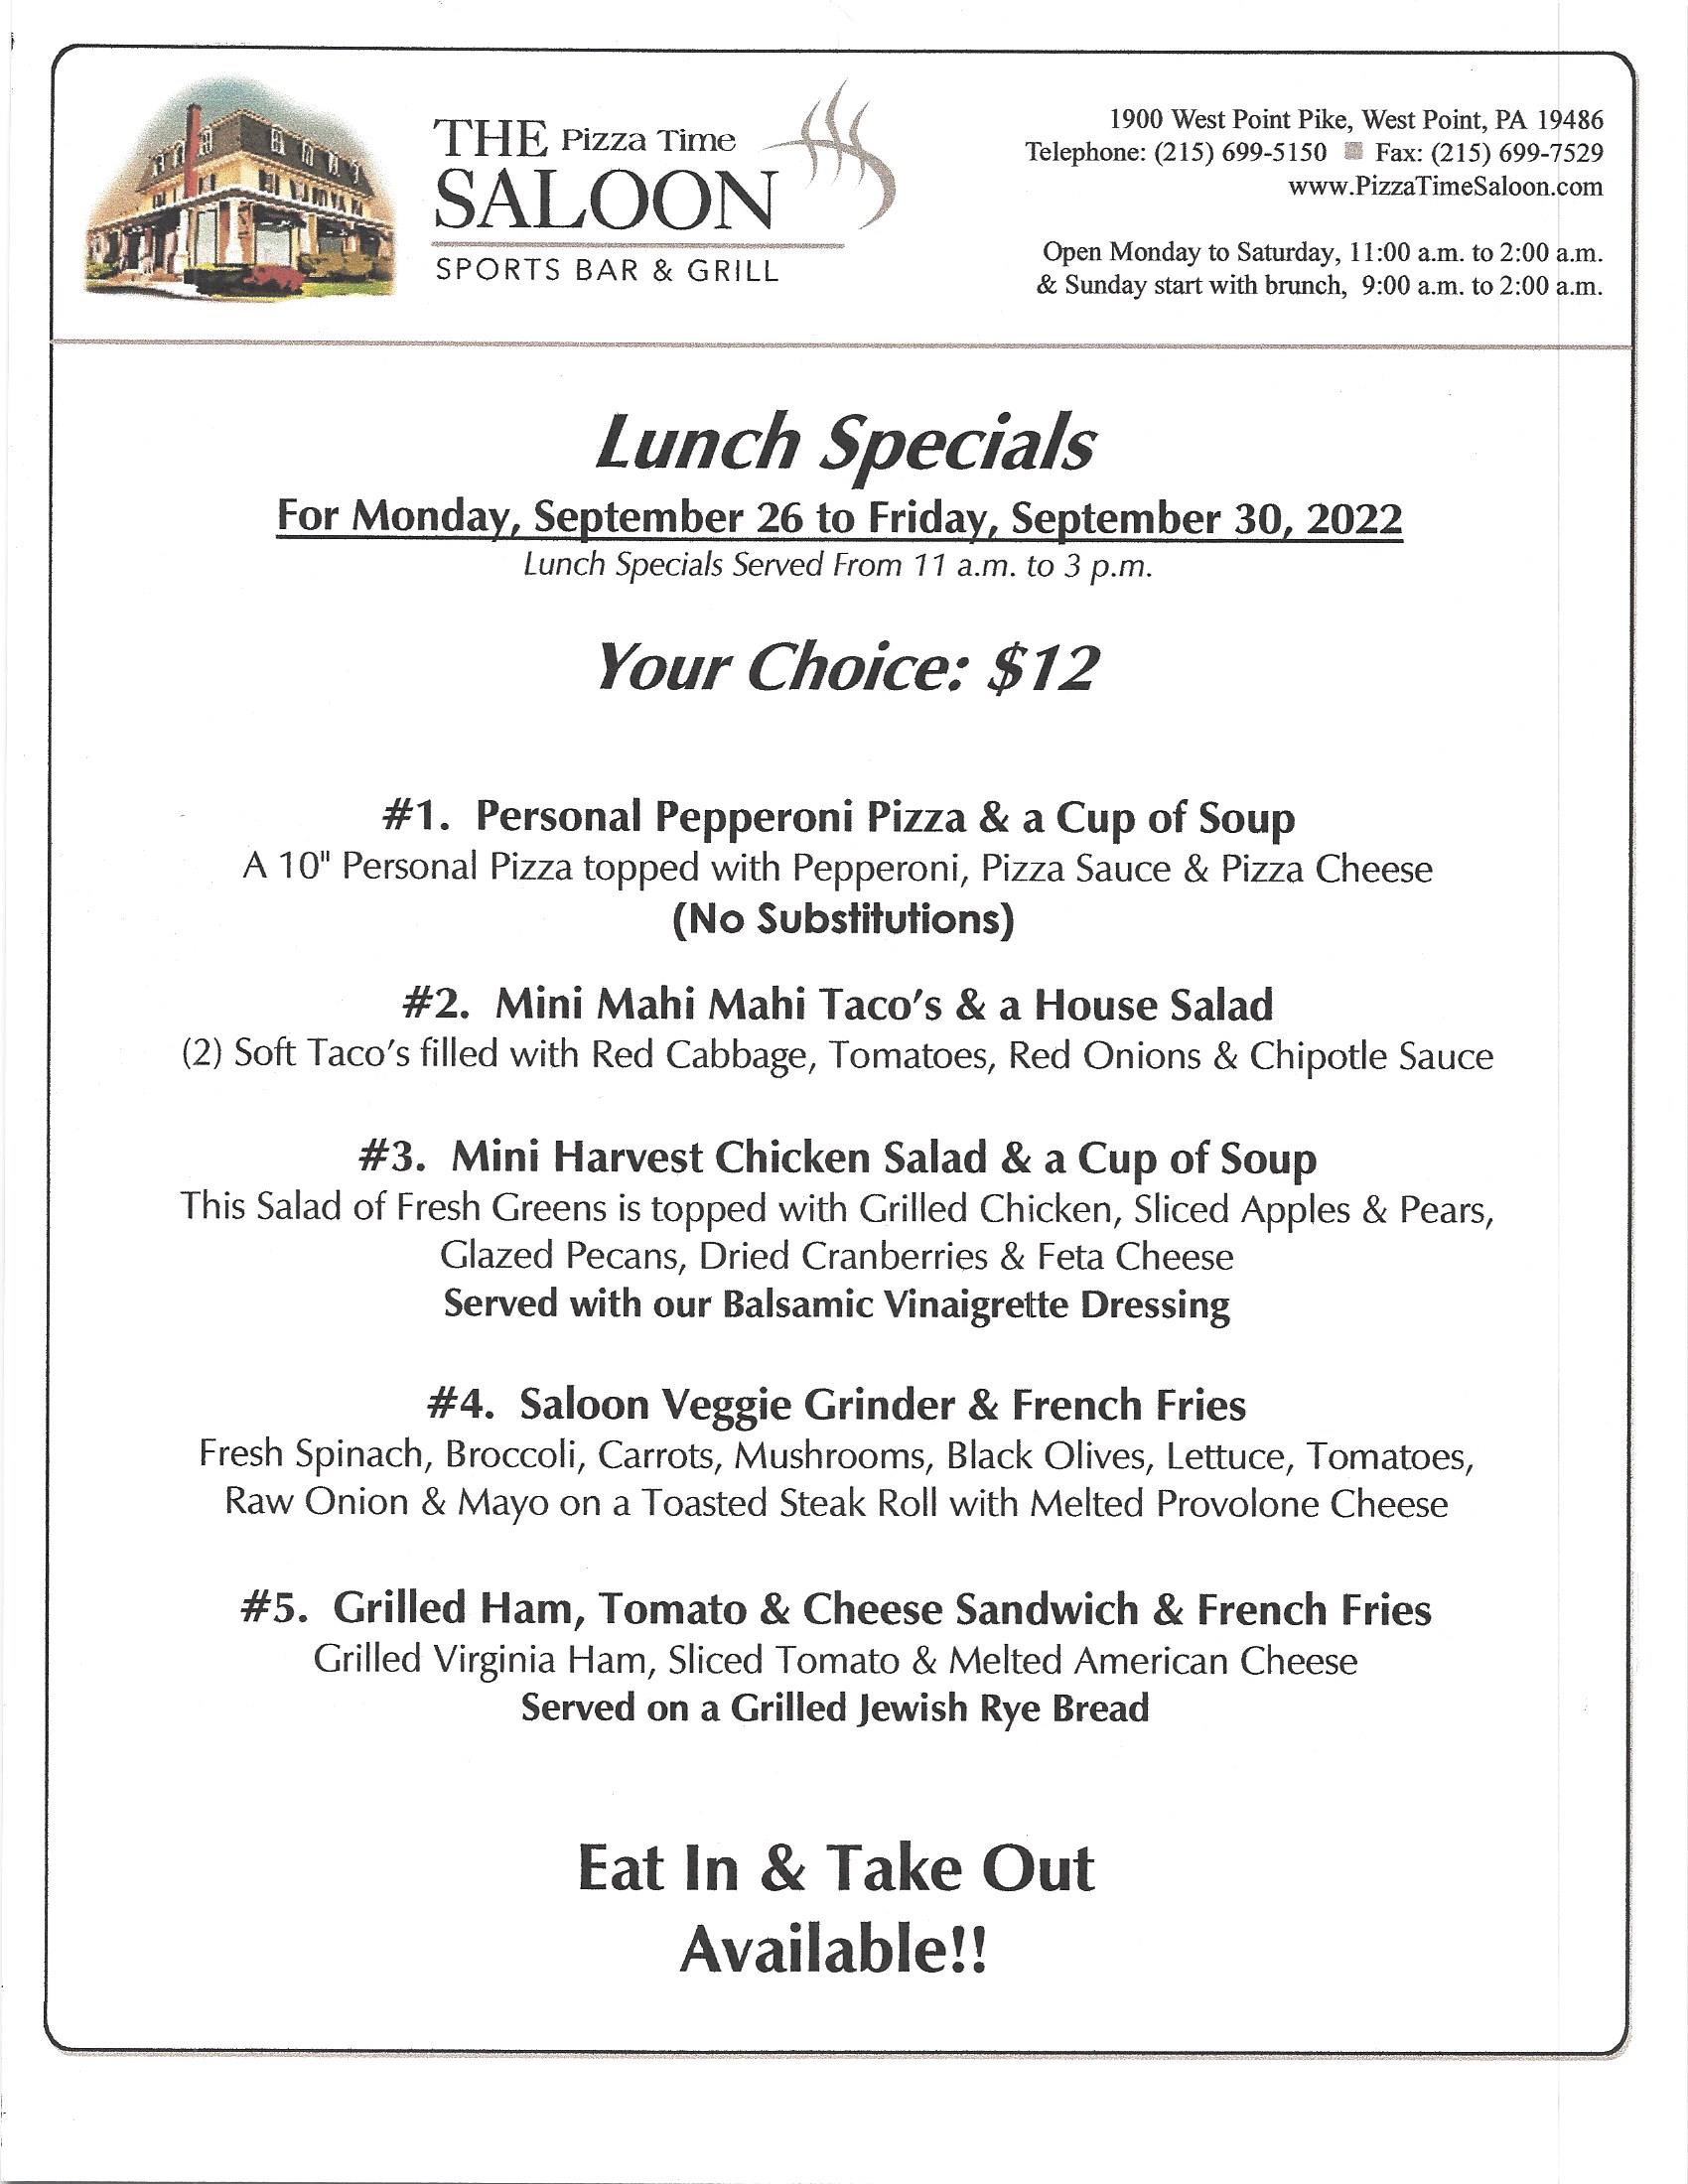 PTS lunch specials 9-26-22